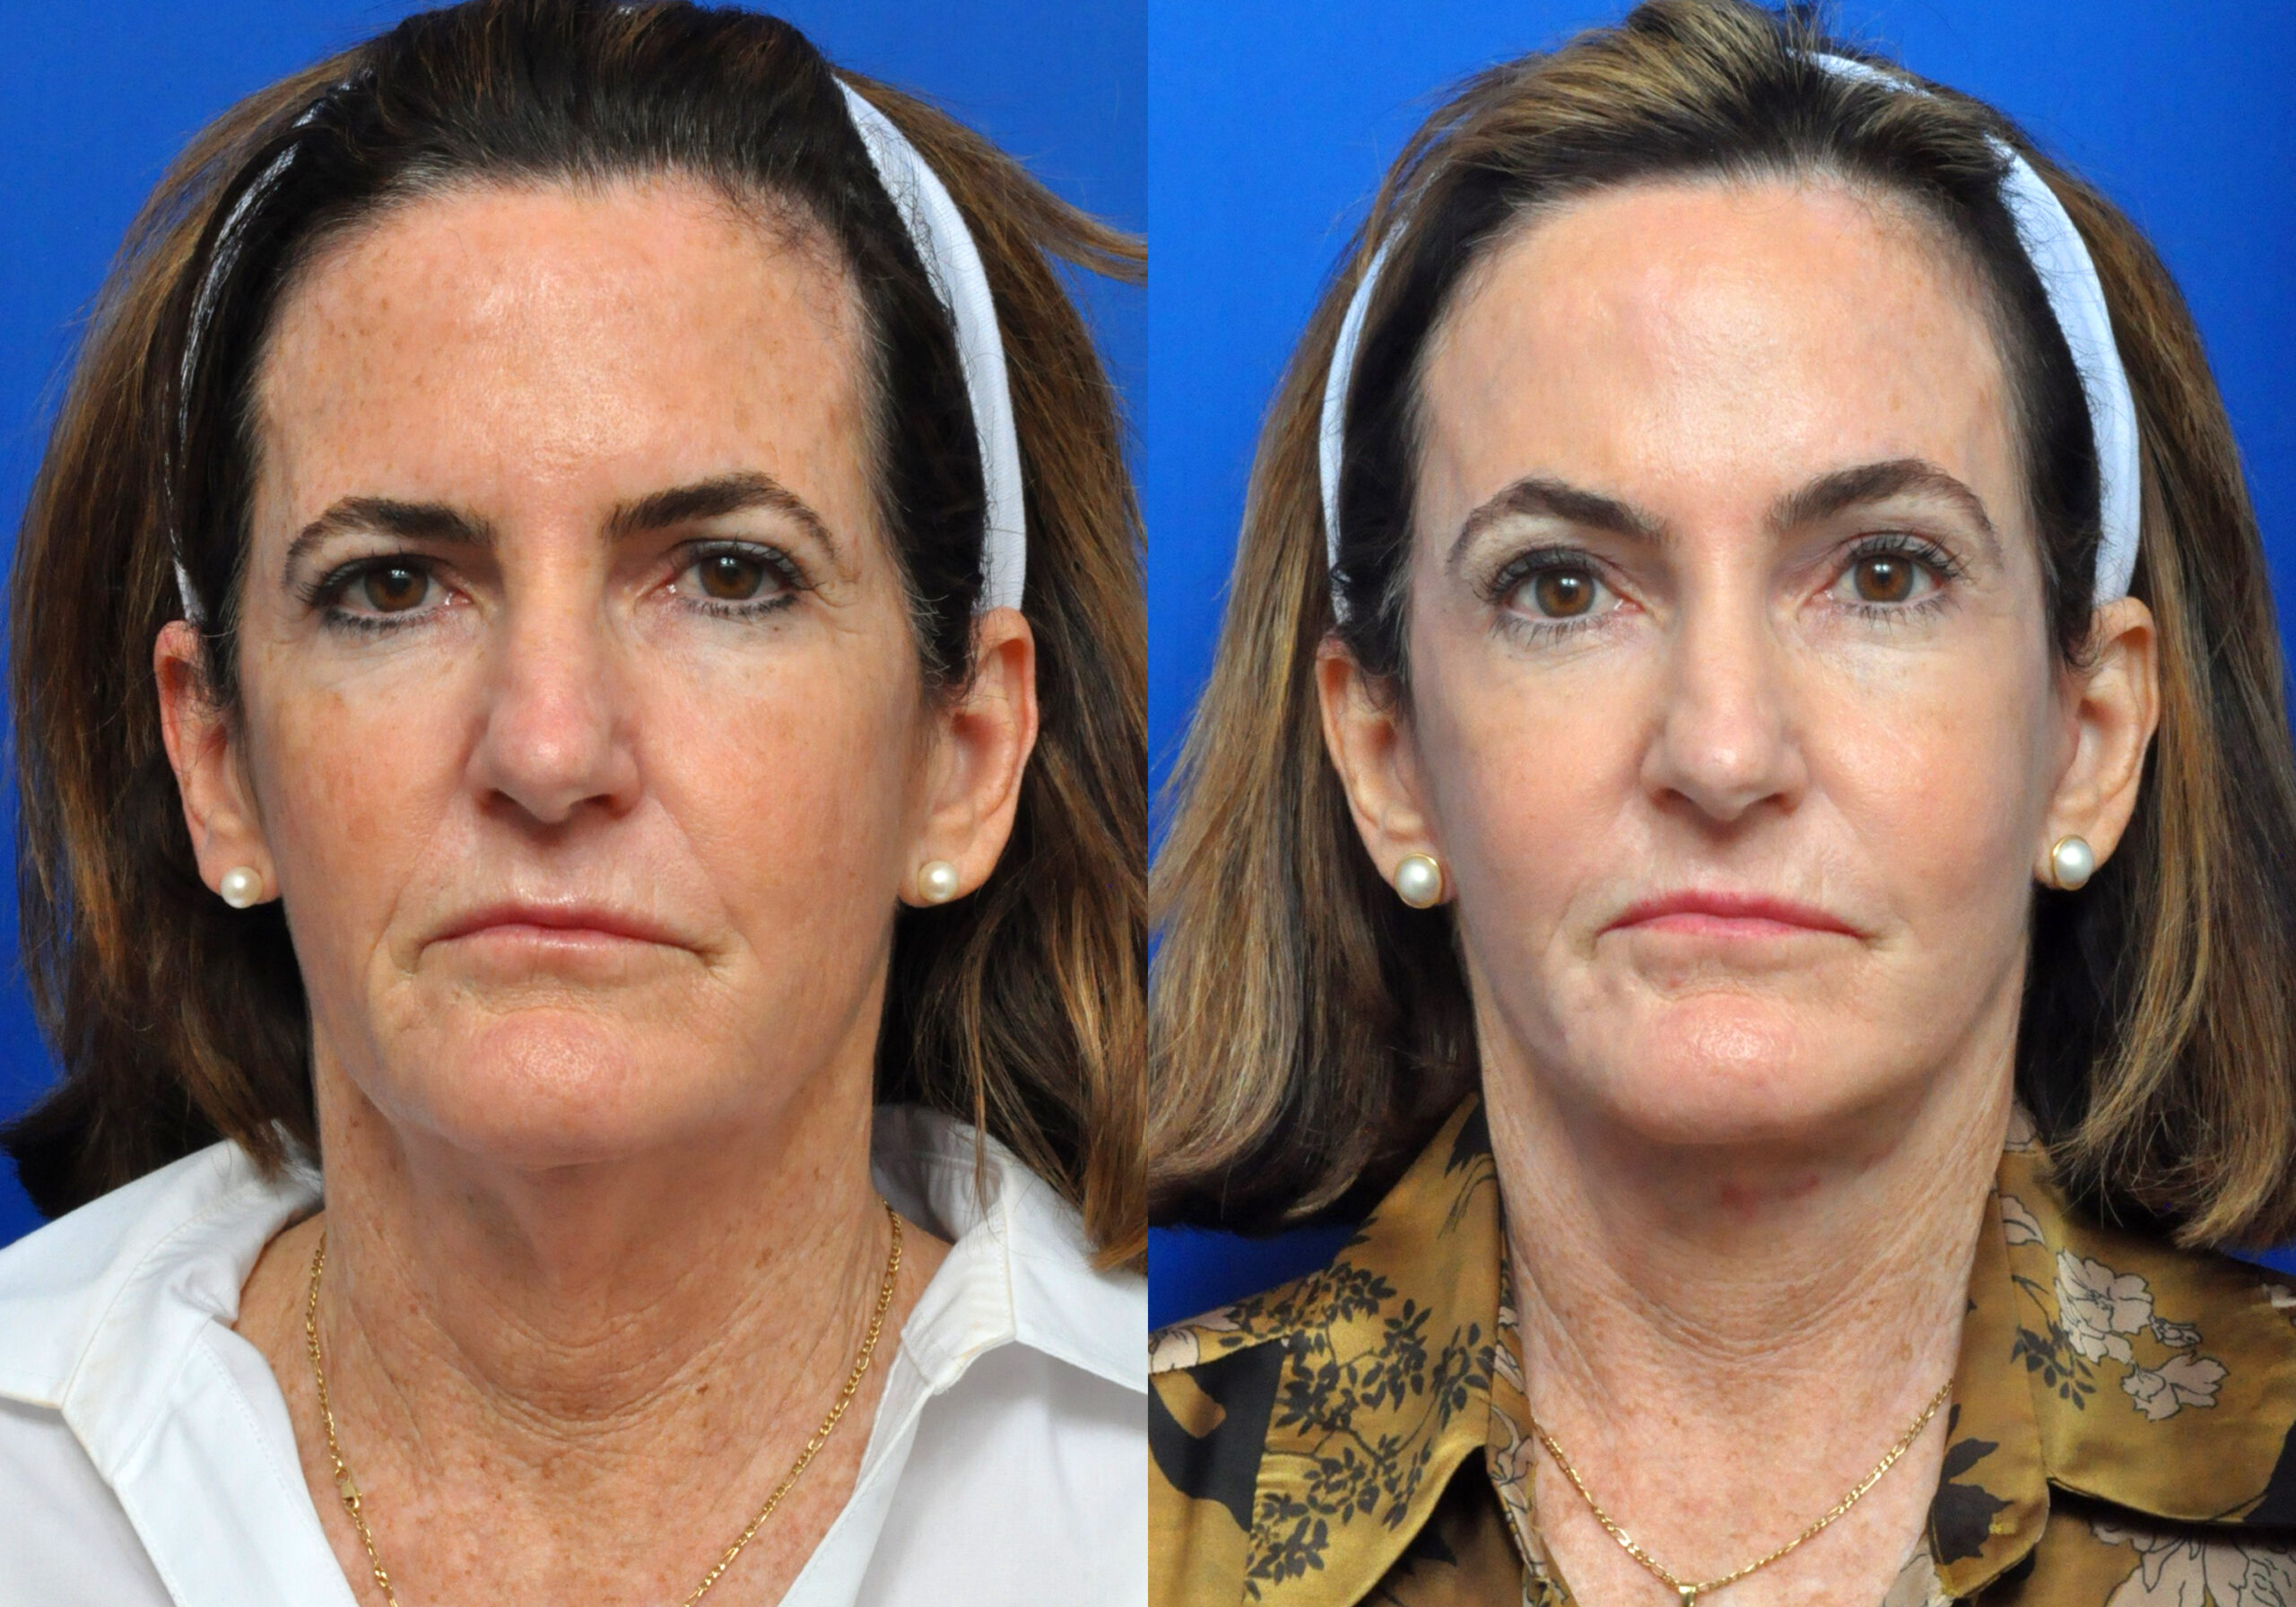 This patient received a Full Face Chemical Peel to help even her skin tone, along with her facelift, neck lift, brow lift, and fat grafting procedure.